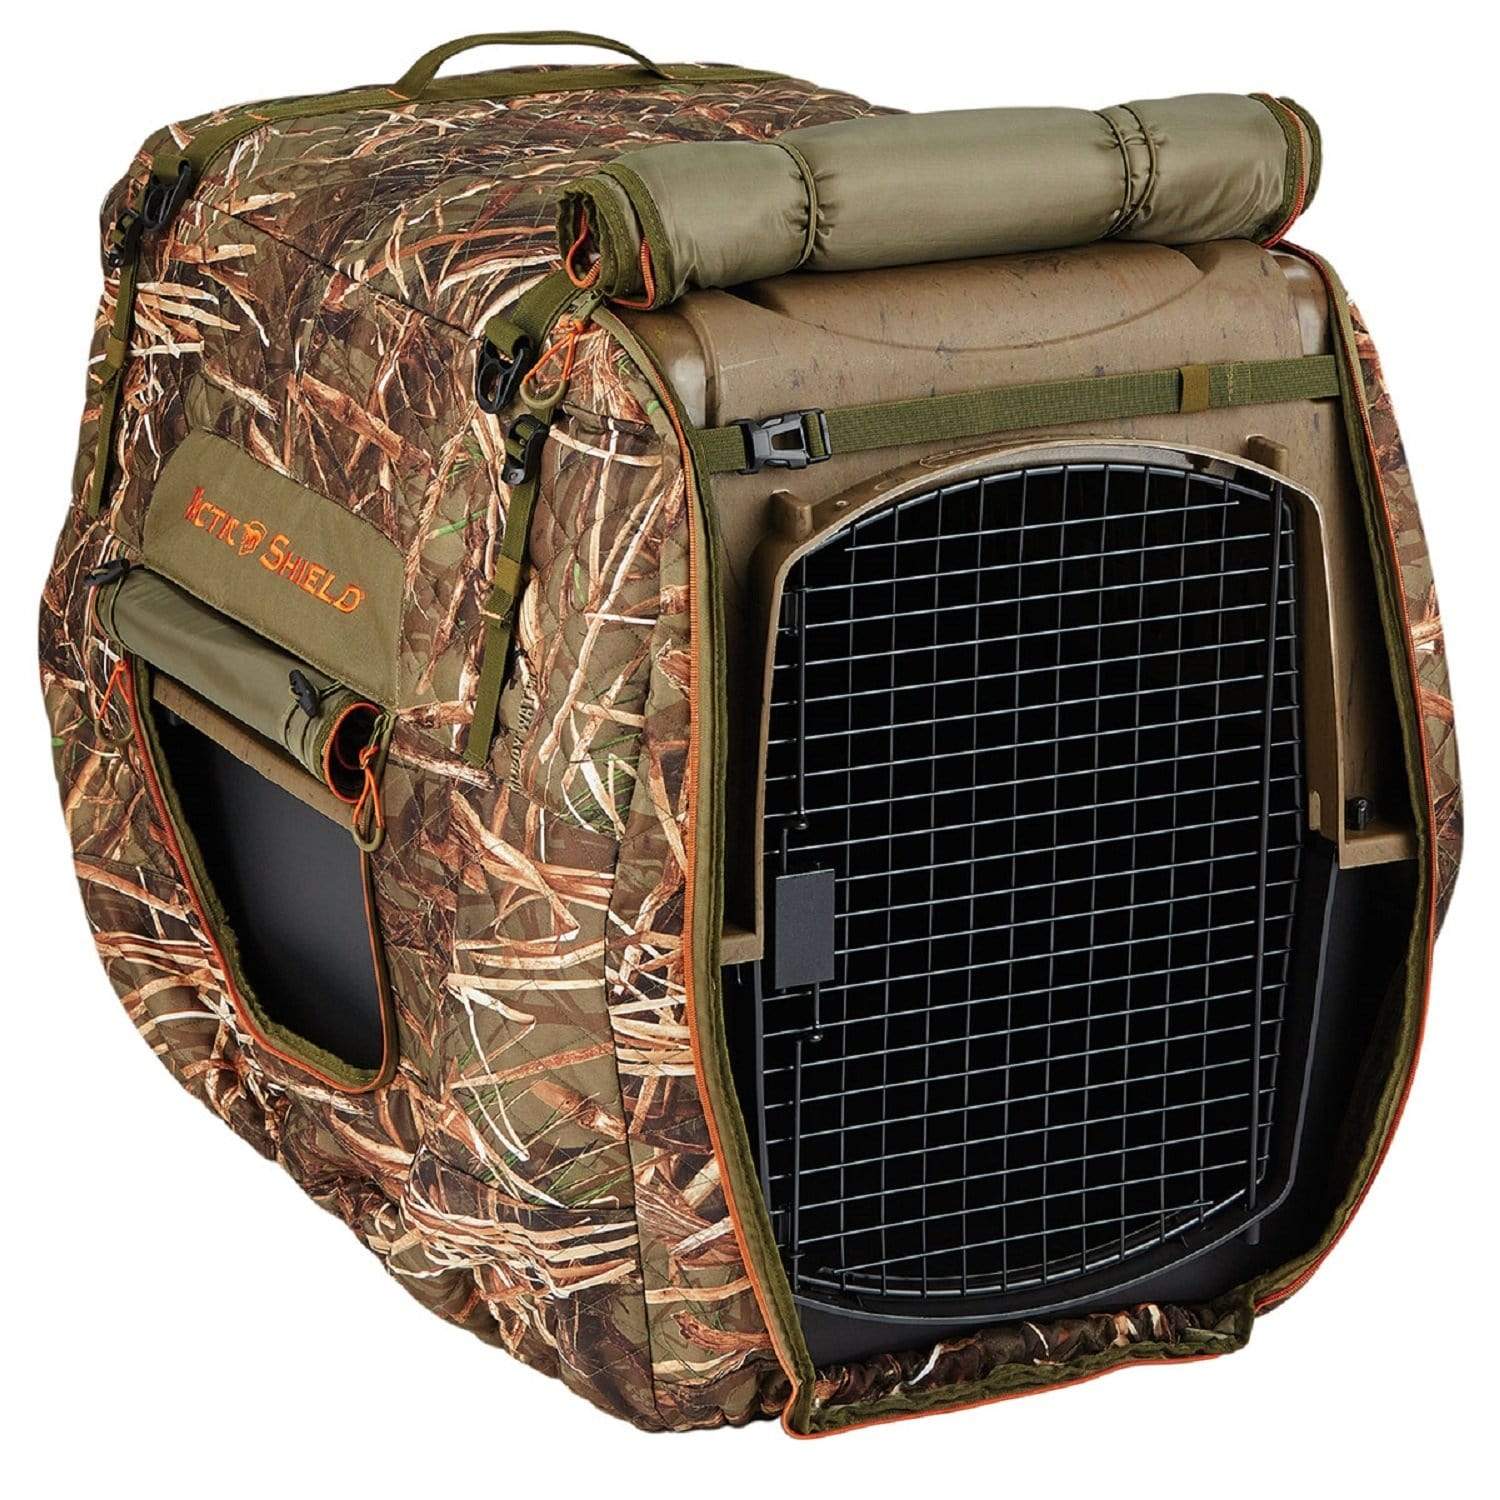 Onyx Hunting : Accessories Onyx Insulated Kennel Cover w ArcticShield Tech-Lrge